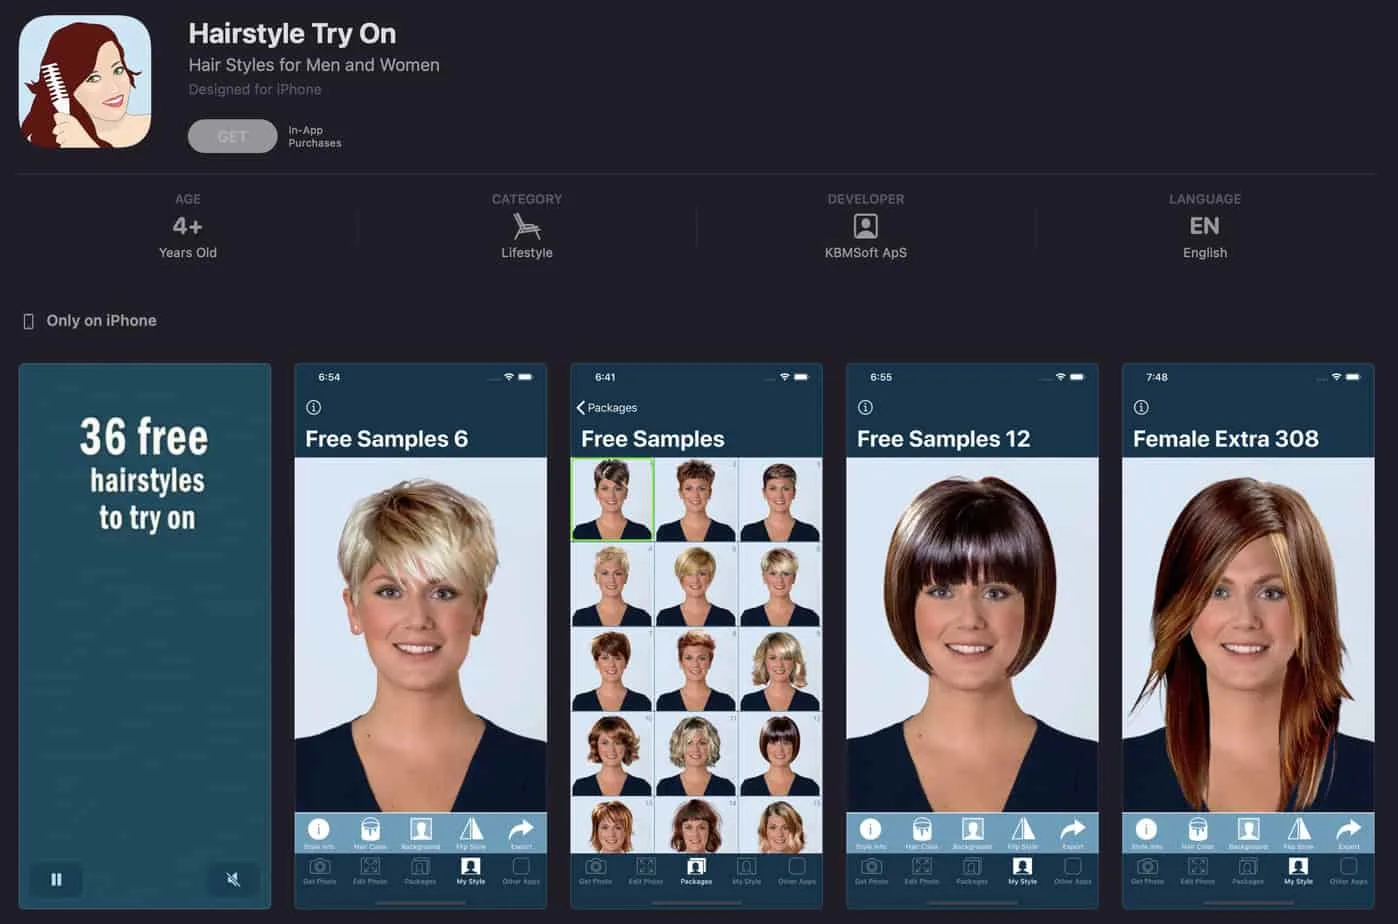 Using the Hairstyle Try-On app you can try on different hair lengths or see how you'd look with a new hairstyle.